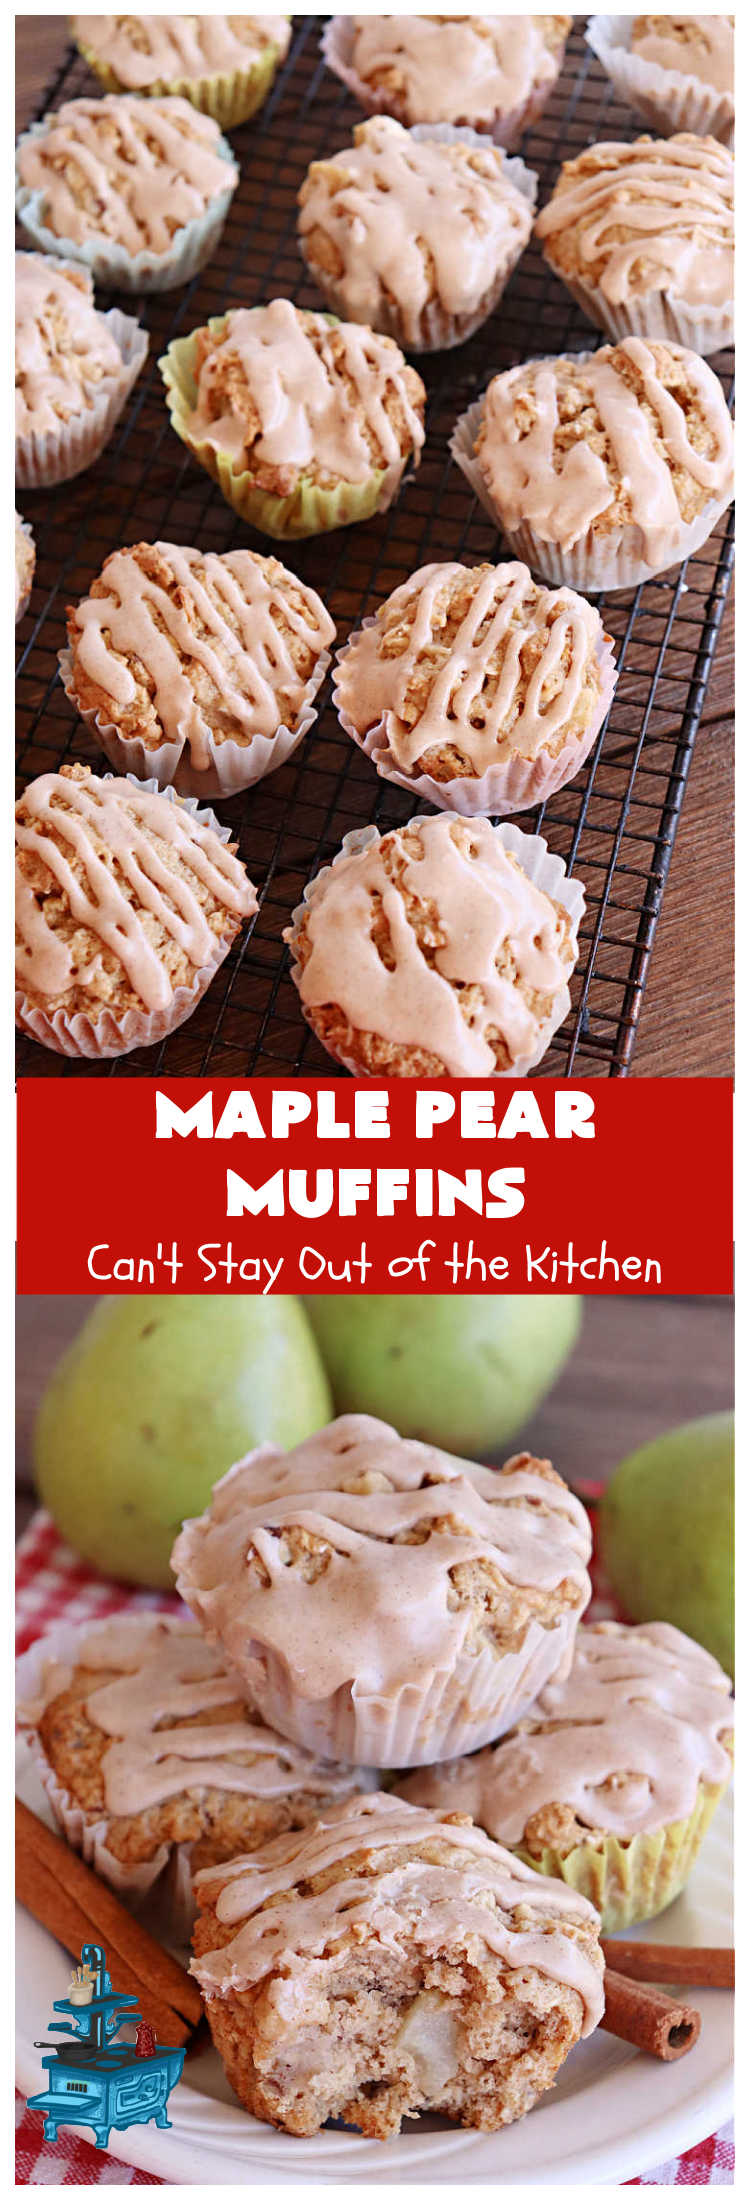 Maple Pear Muffins | Can't Stay Out of the Kitchen | these #muffins are absolutely delightful for a weekend, company or #holiday #breakfast. They're filled with #pears, #pecans, #oatmeal, #MapleSyrup & #MapleExtract to  make them pop in flavor. #Cinnamon icing puts them over the top! Every bite will have you drooling. #MaplePearMuffins